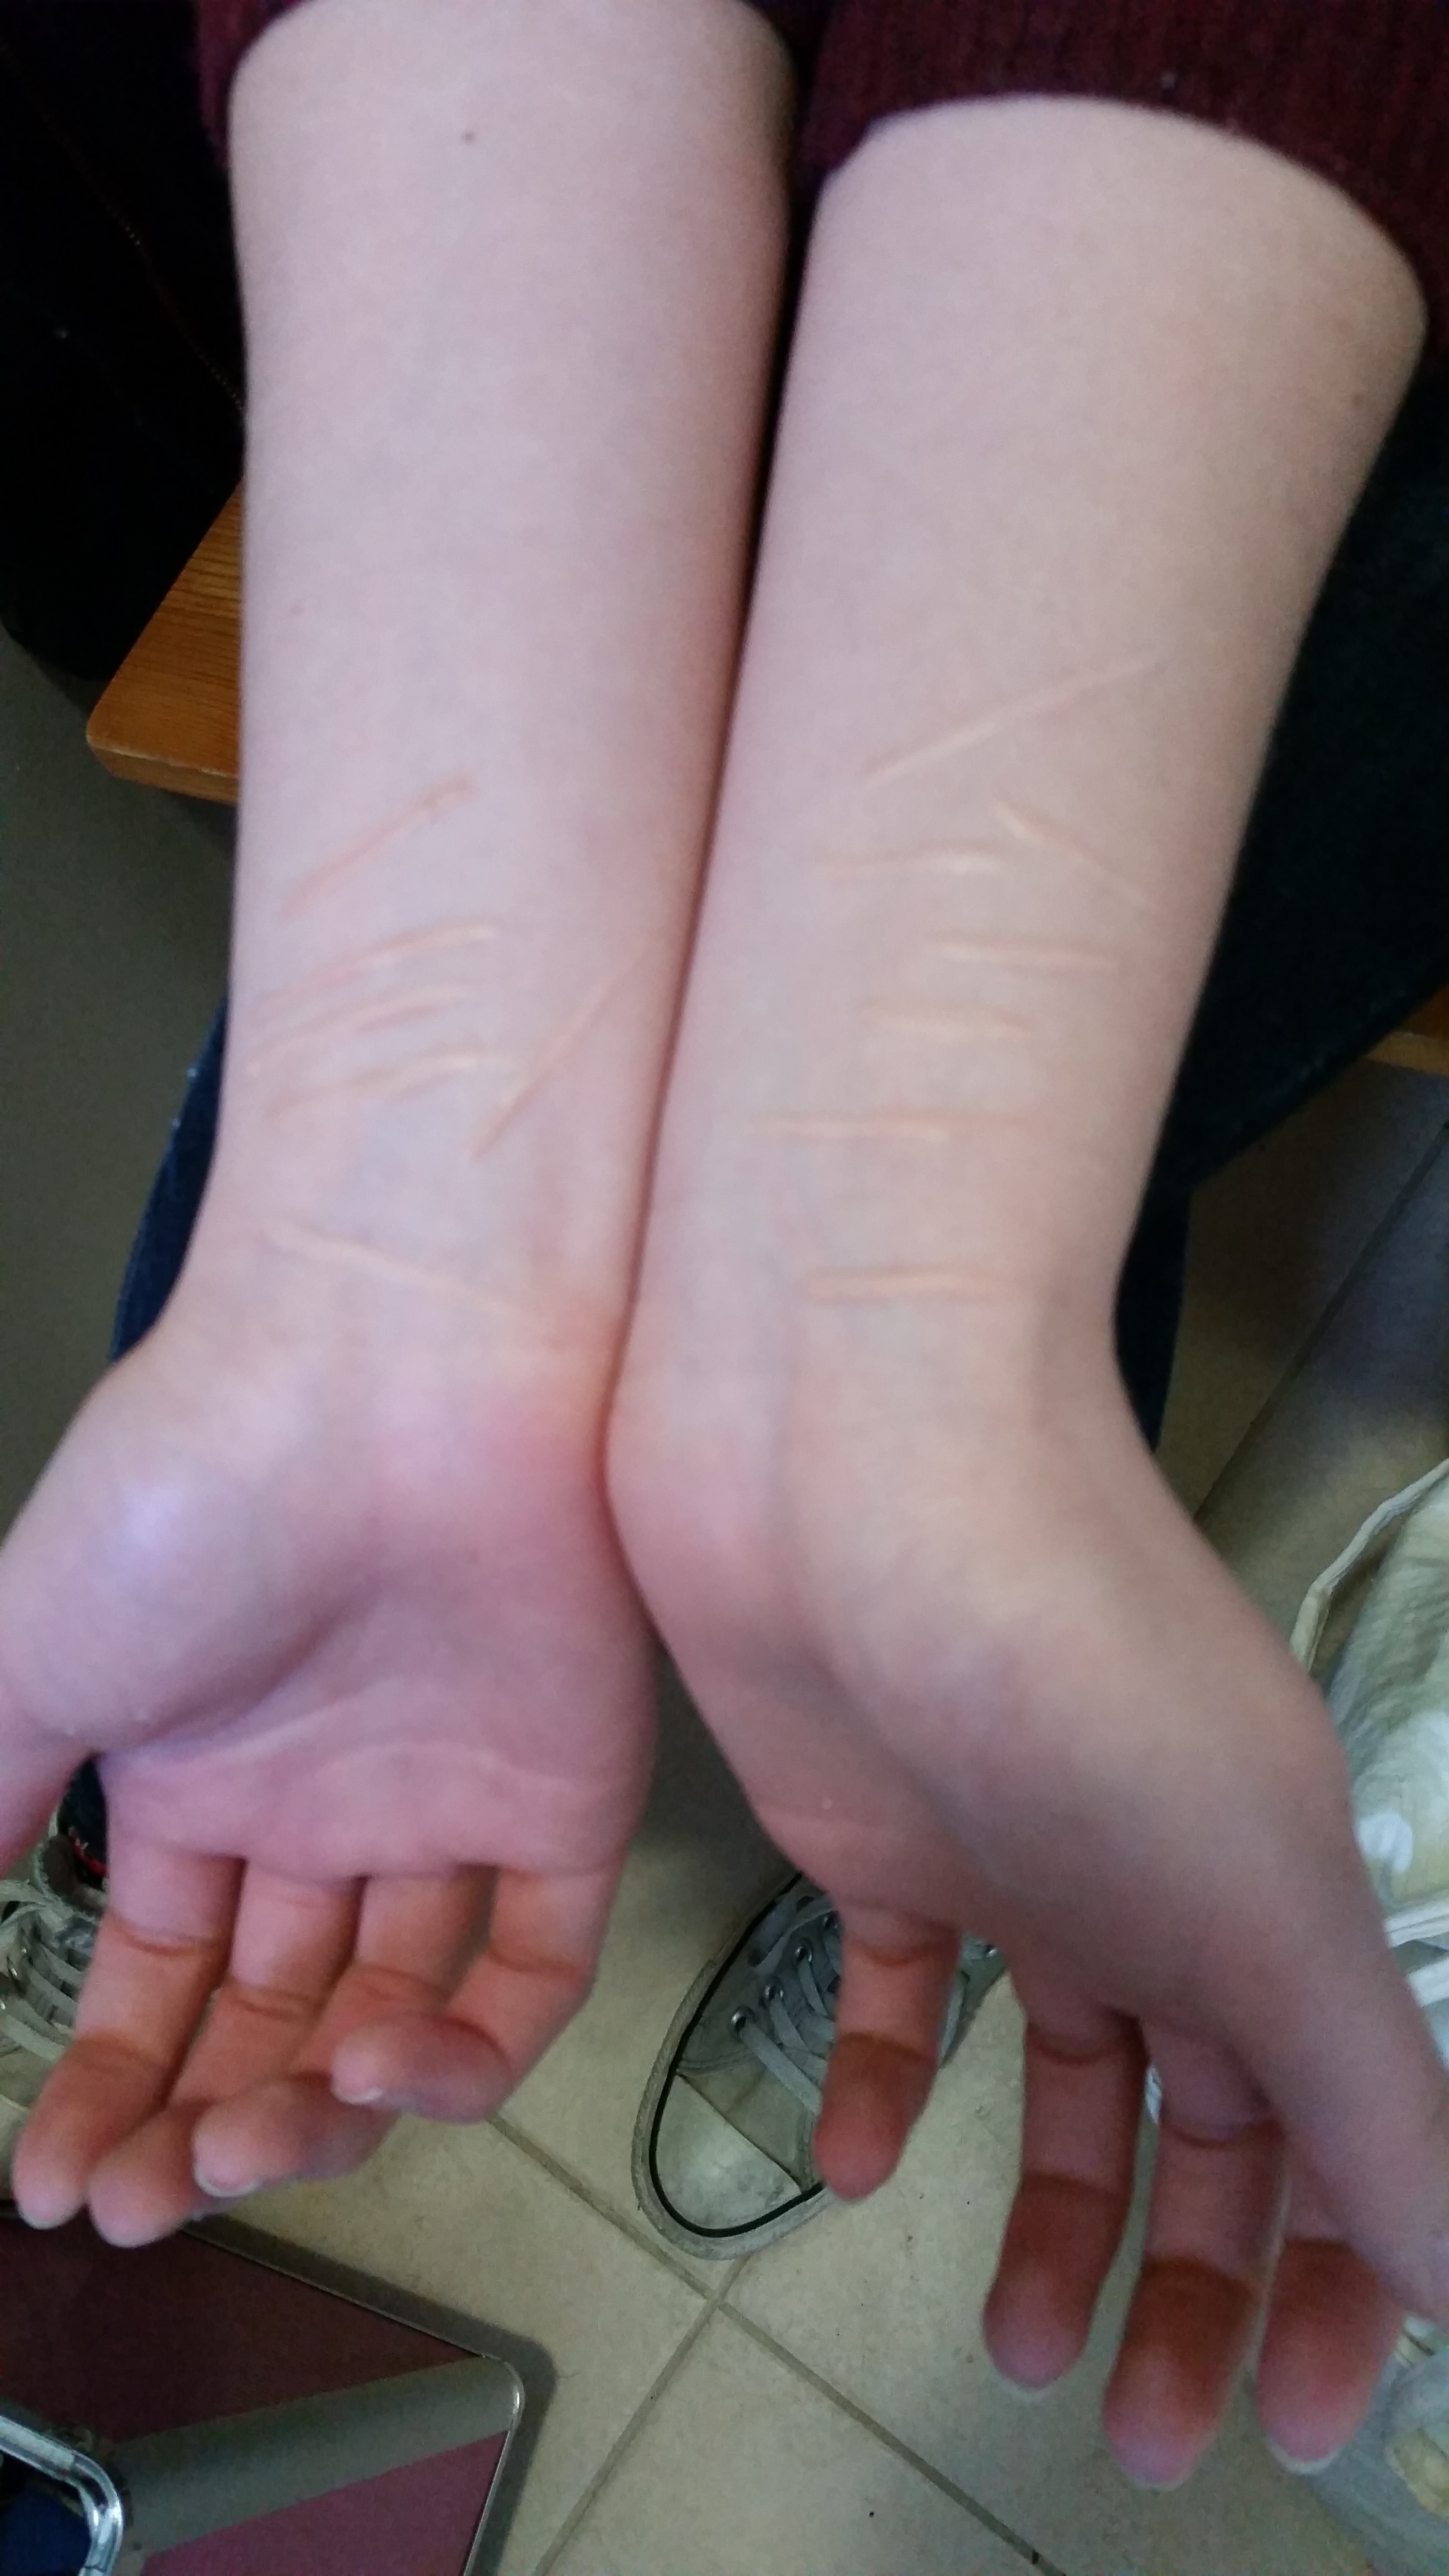 Self Harming Marks from 'The Voice' Short film, I done.